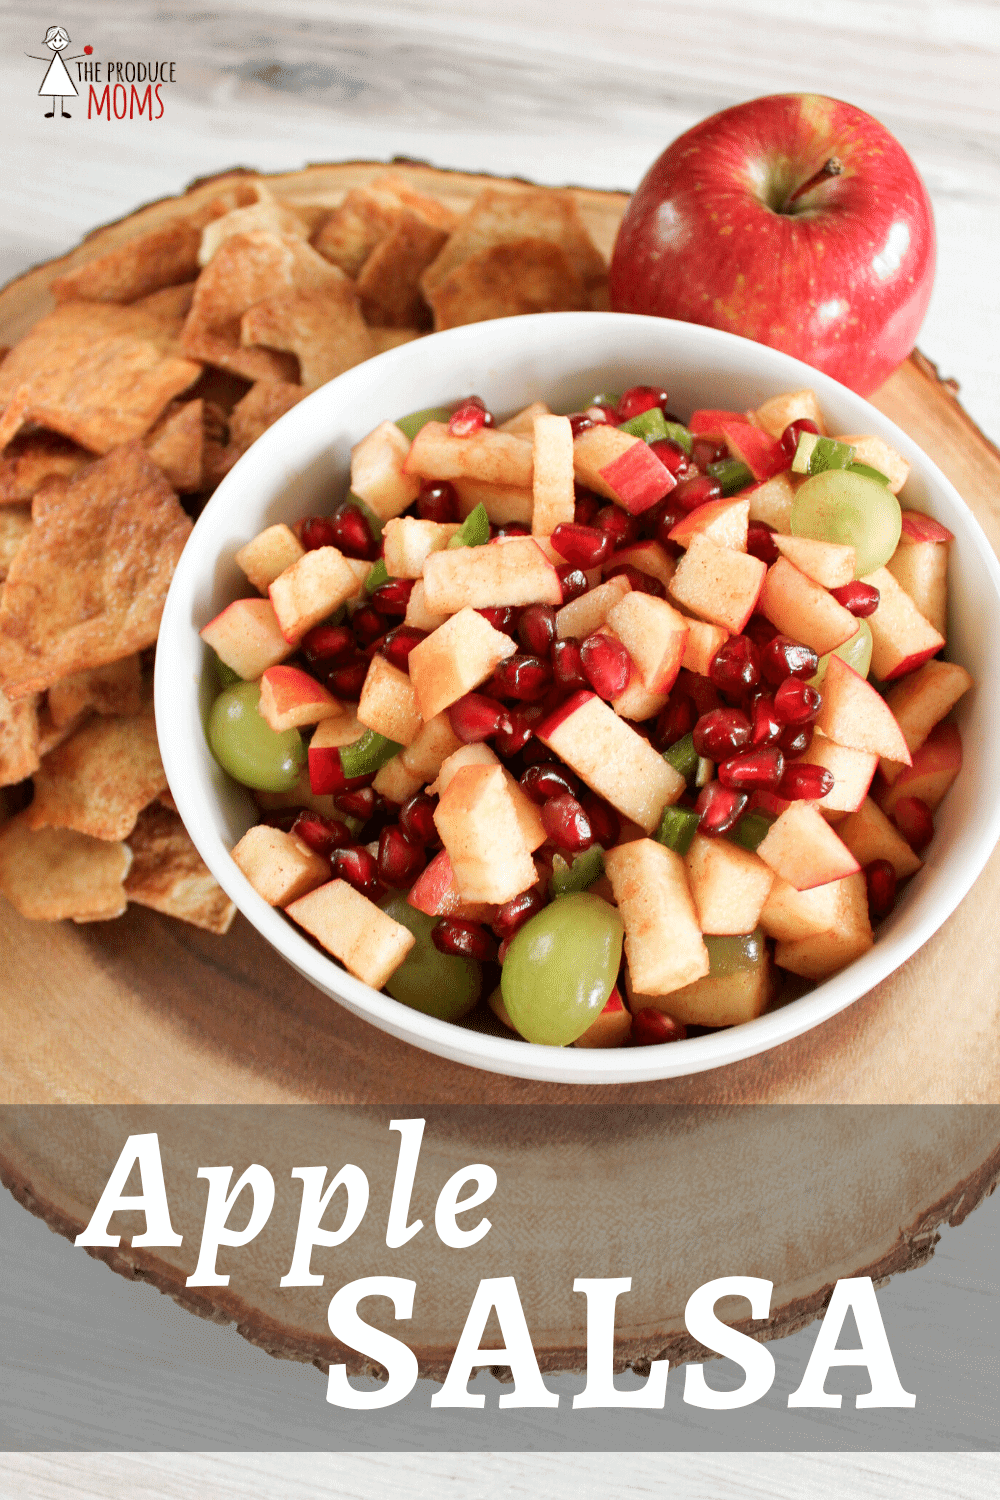 bowl of apple salsa with side of pita chips and an apple